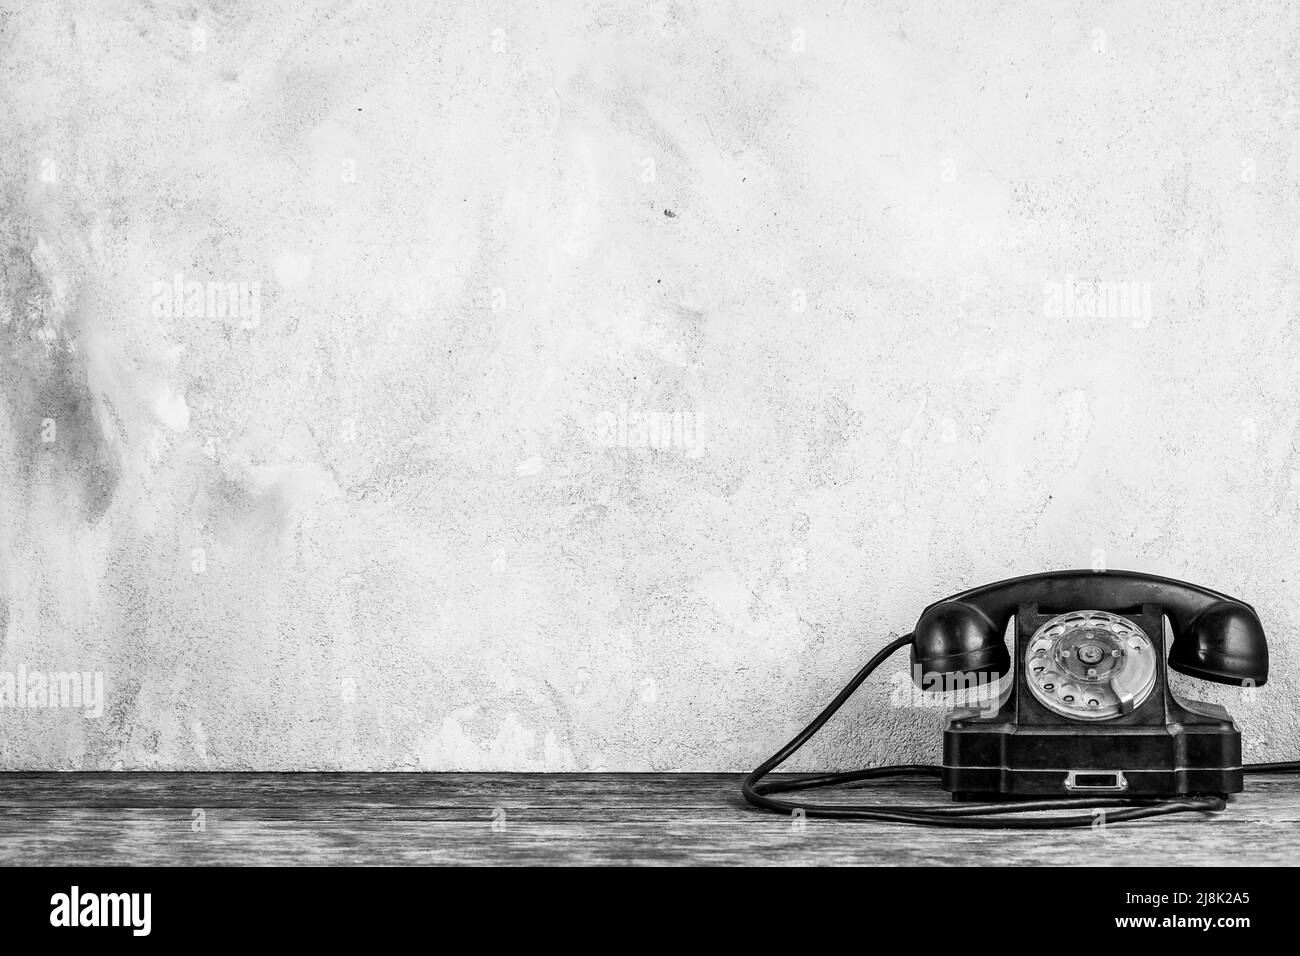 Retro black rotary telephone on wooden table in front gray concrete background Stock Photo